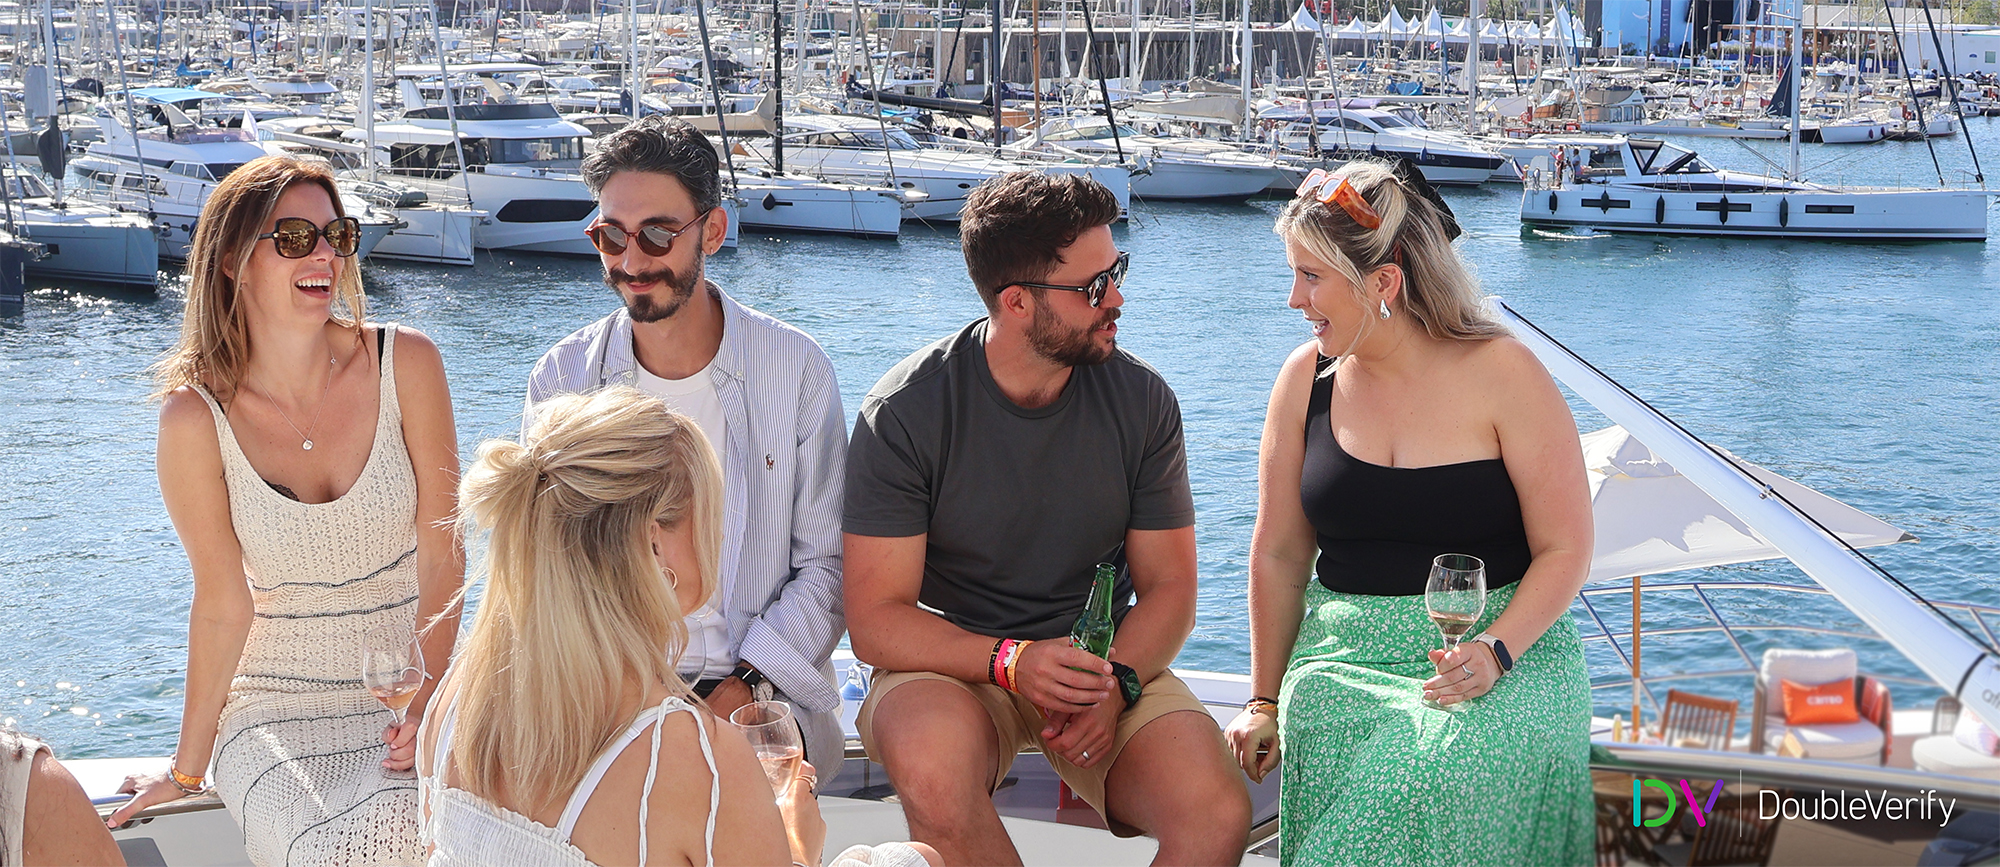 Photo taken on DV's yacht at the 2024 Cannes Lions International Festival of Creativity showing four people sitting on the edge of the yacht and socializing with drinks in their hands.